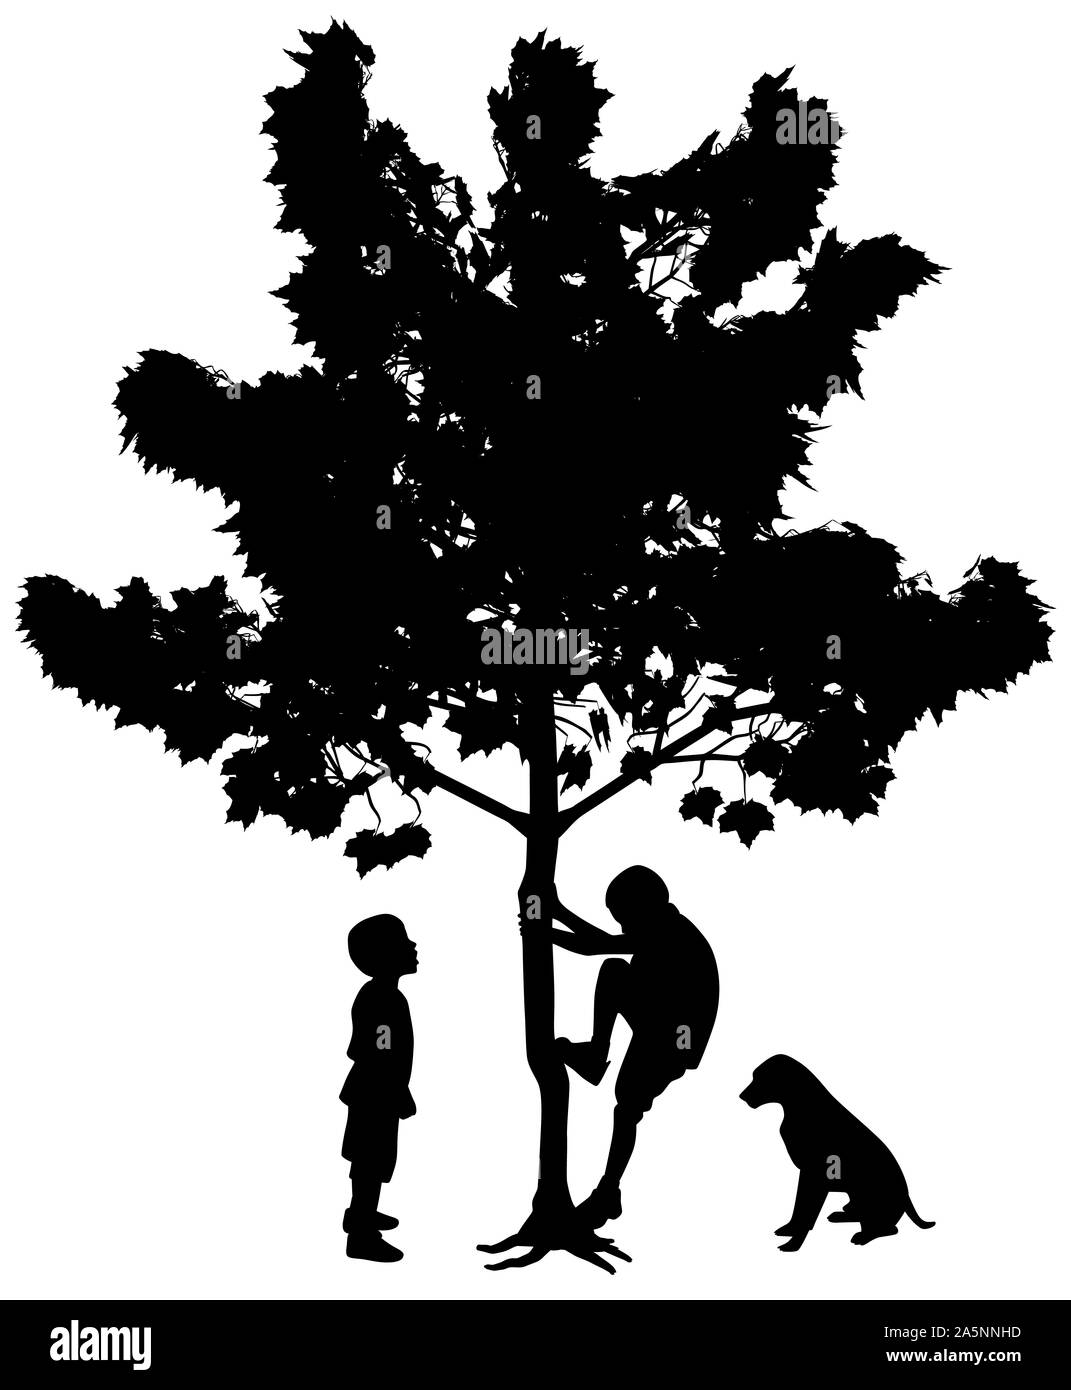 Two best friends little boys with dog. One boy climbing up a tree while another standing and looking with wow face expression at his friend climber. Stock Photo